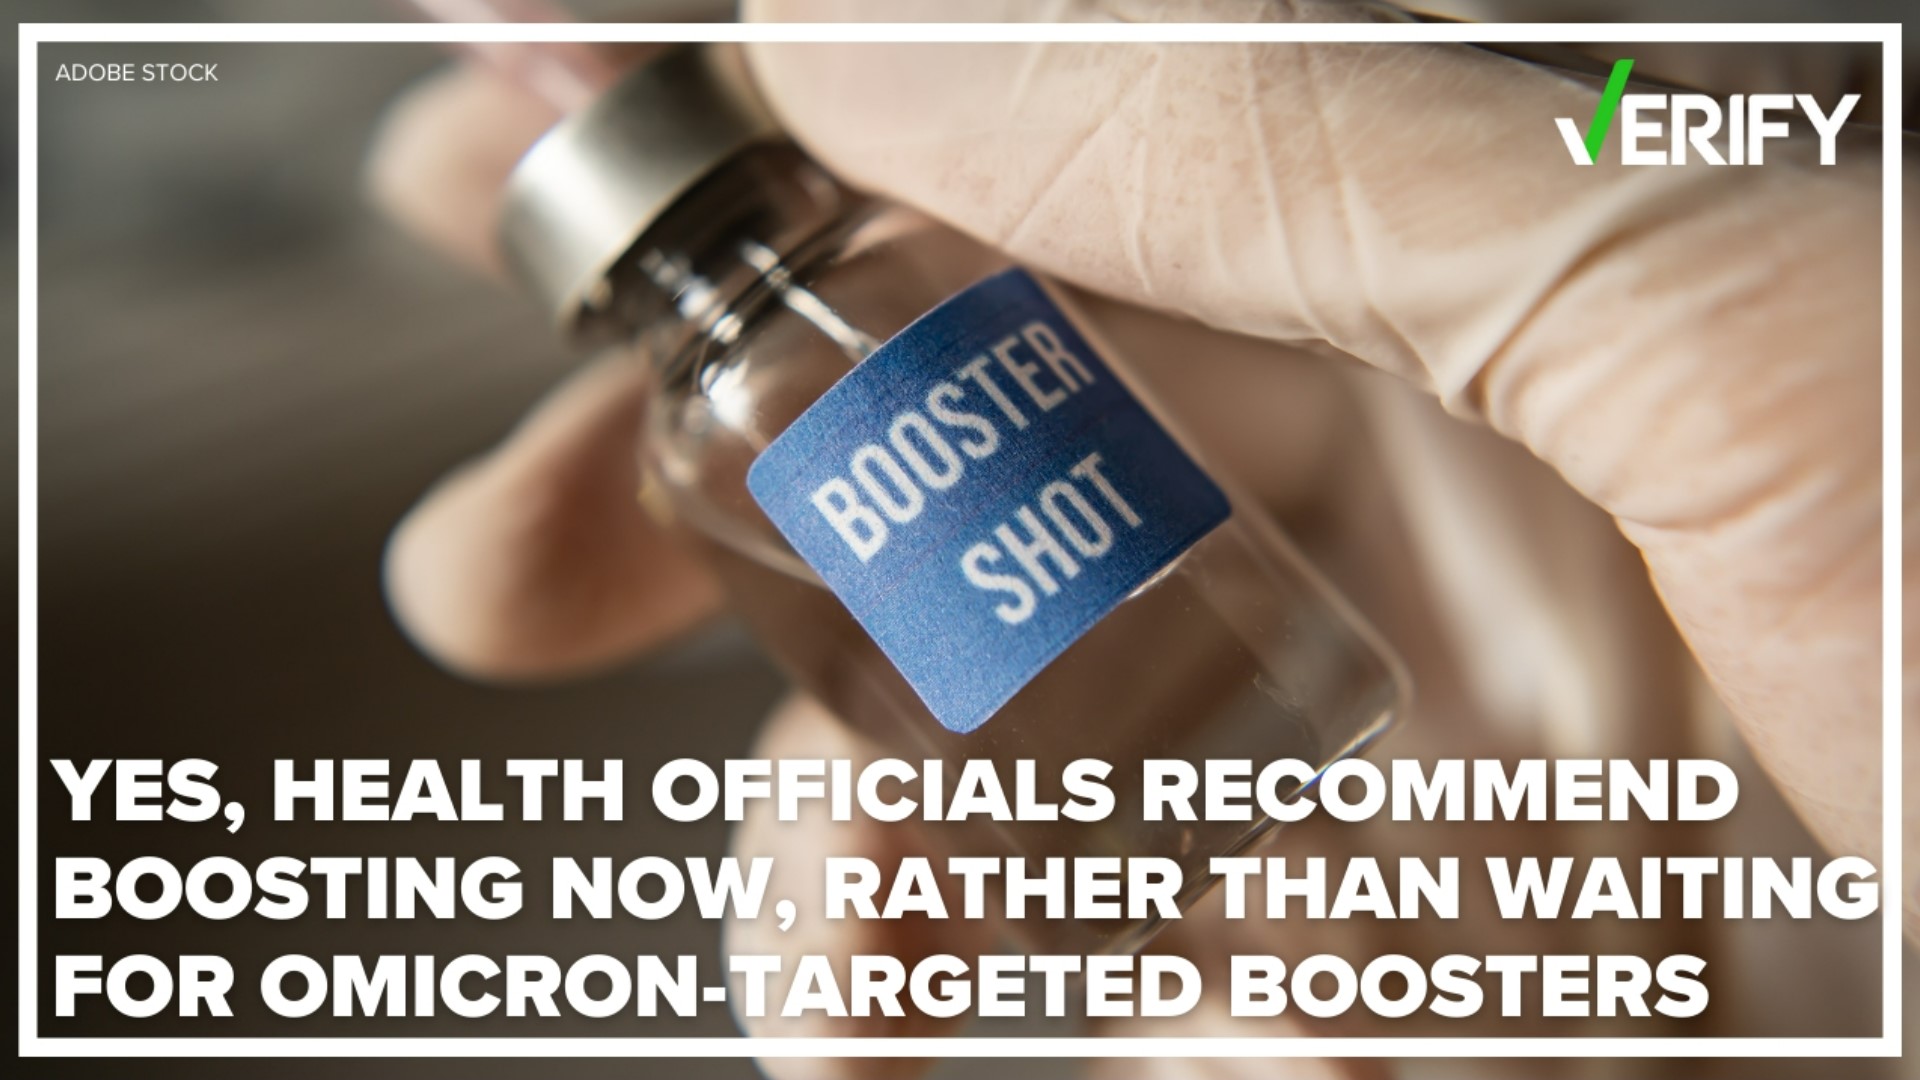 To boost or not to boost? That is the question swirling on social media as the omicron subvariant BA.5 spikes infections nationwide and the promise of an omicron-tar